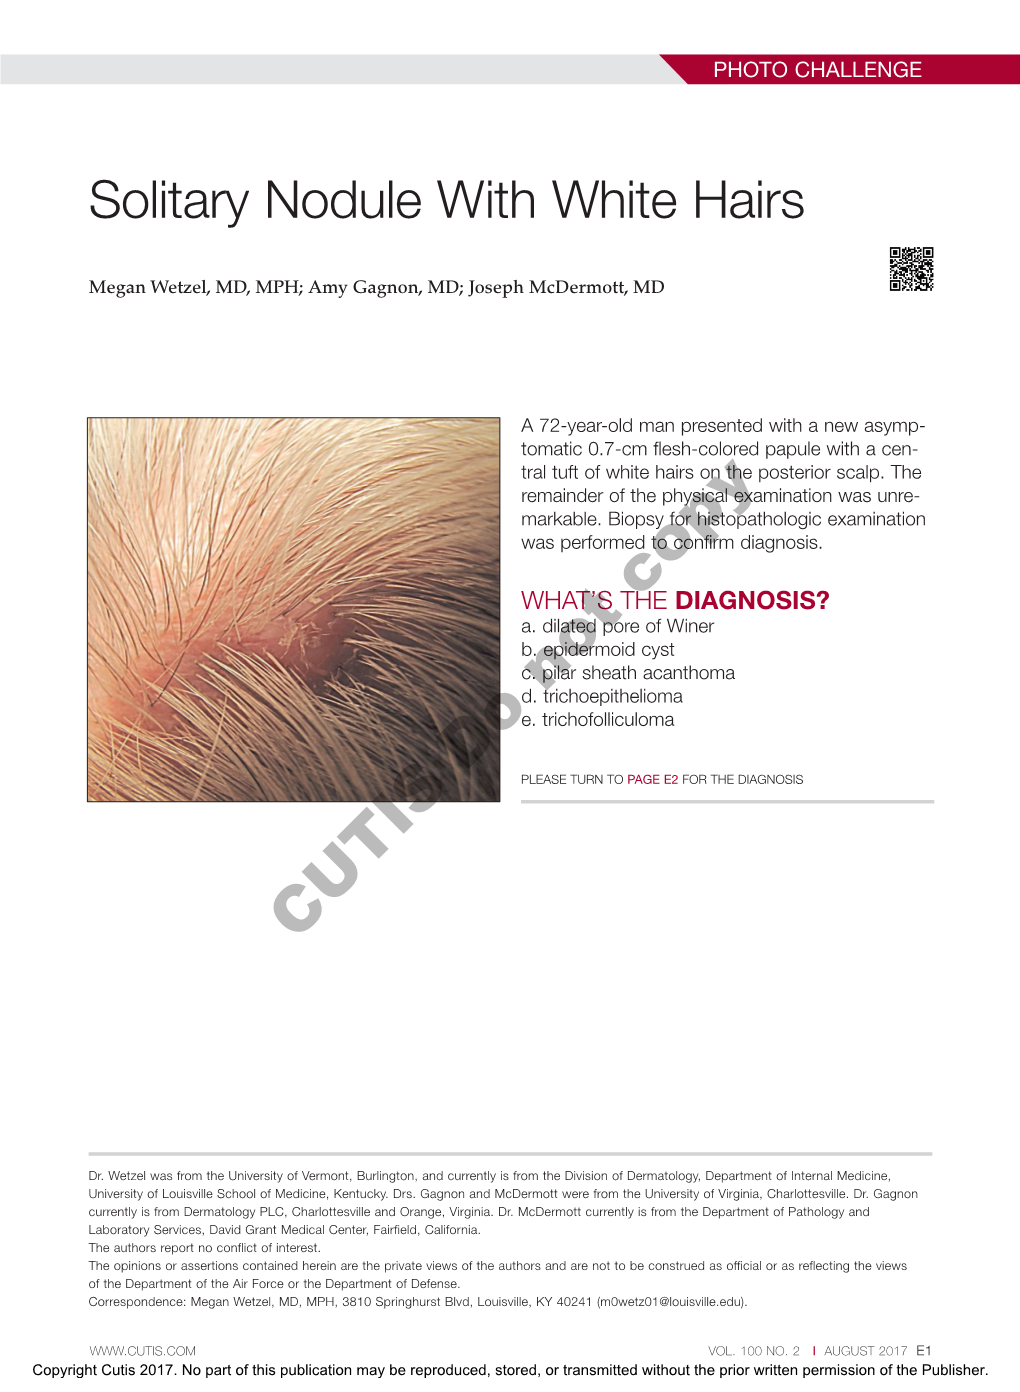 Solitary Nodule with White Hairs